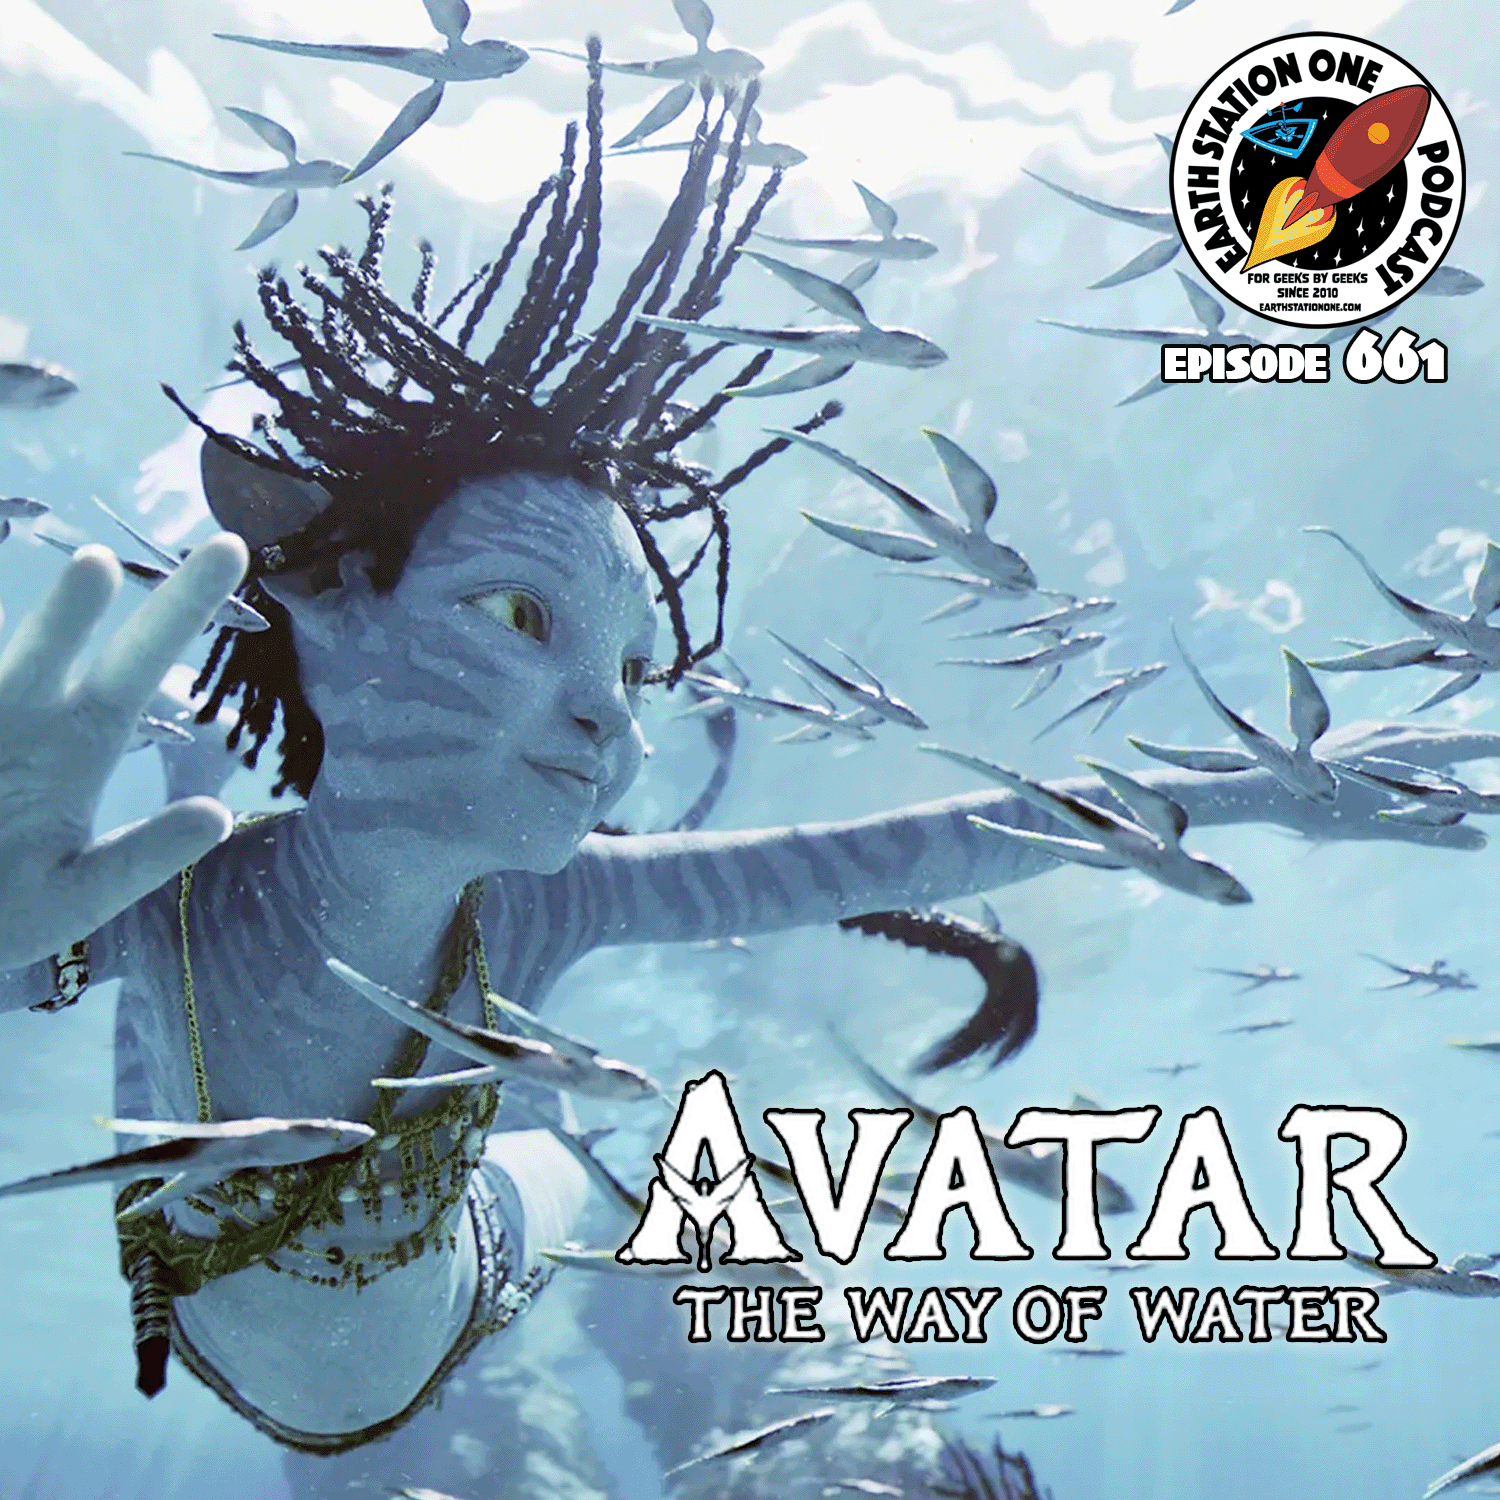 Earth Station One Ep 661 - Avatar: Way of Water Movie Review